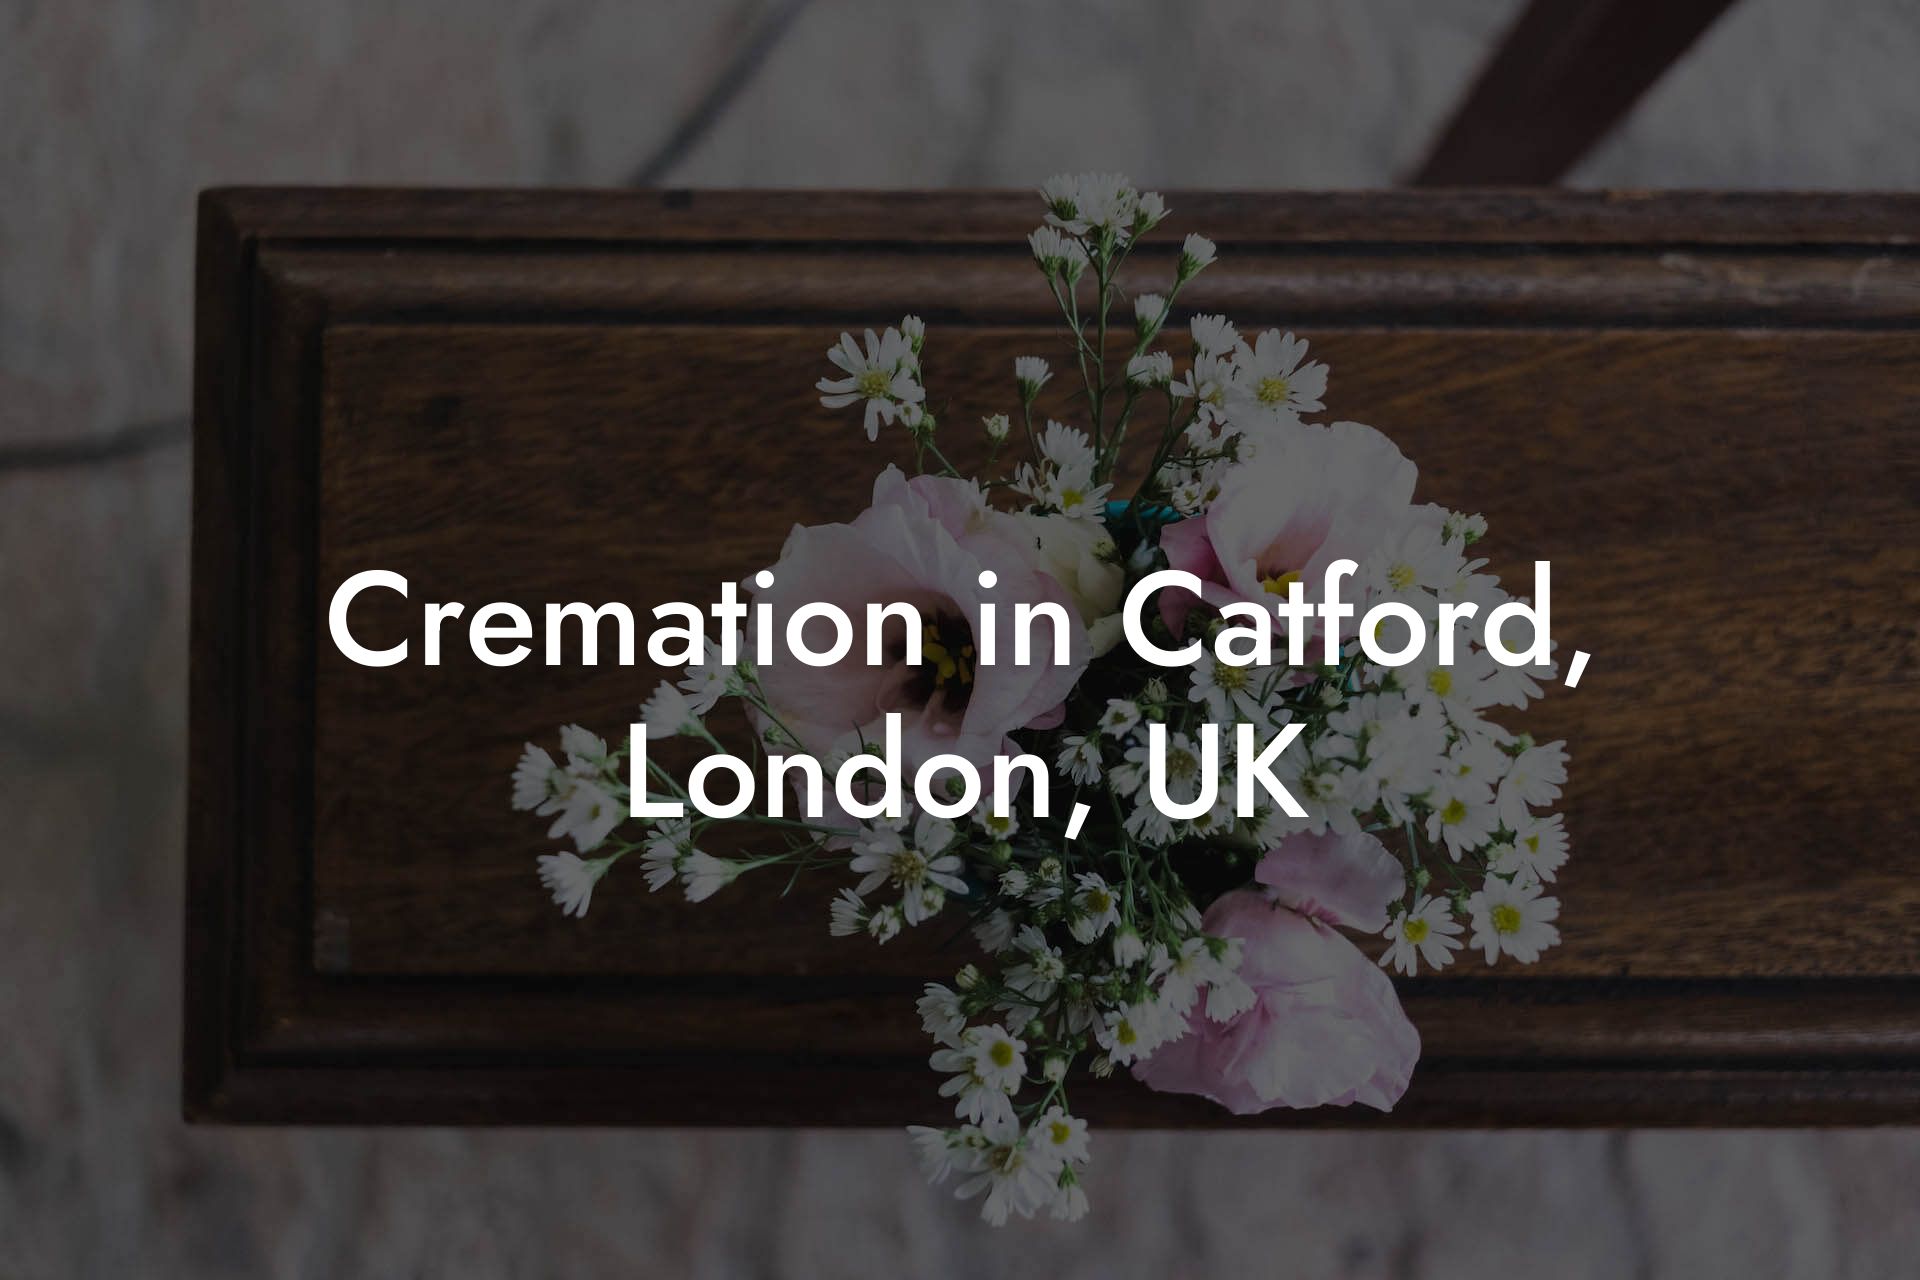 Cremation in Catford, London, UK